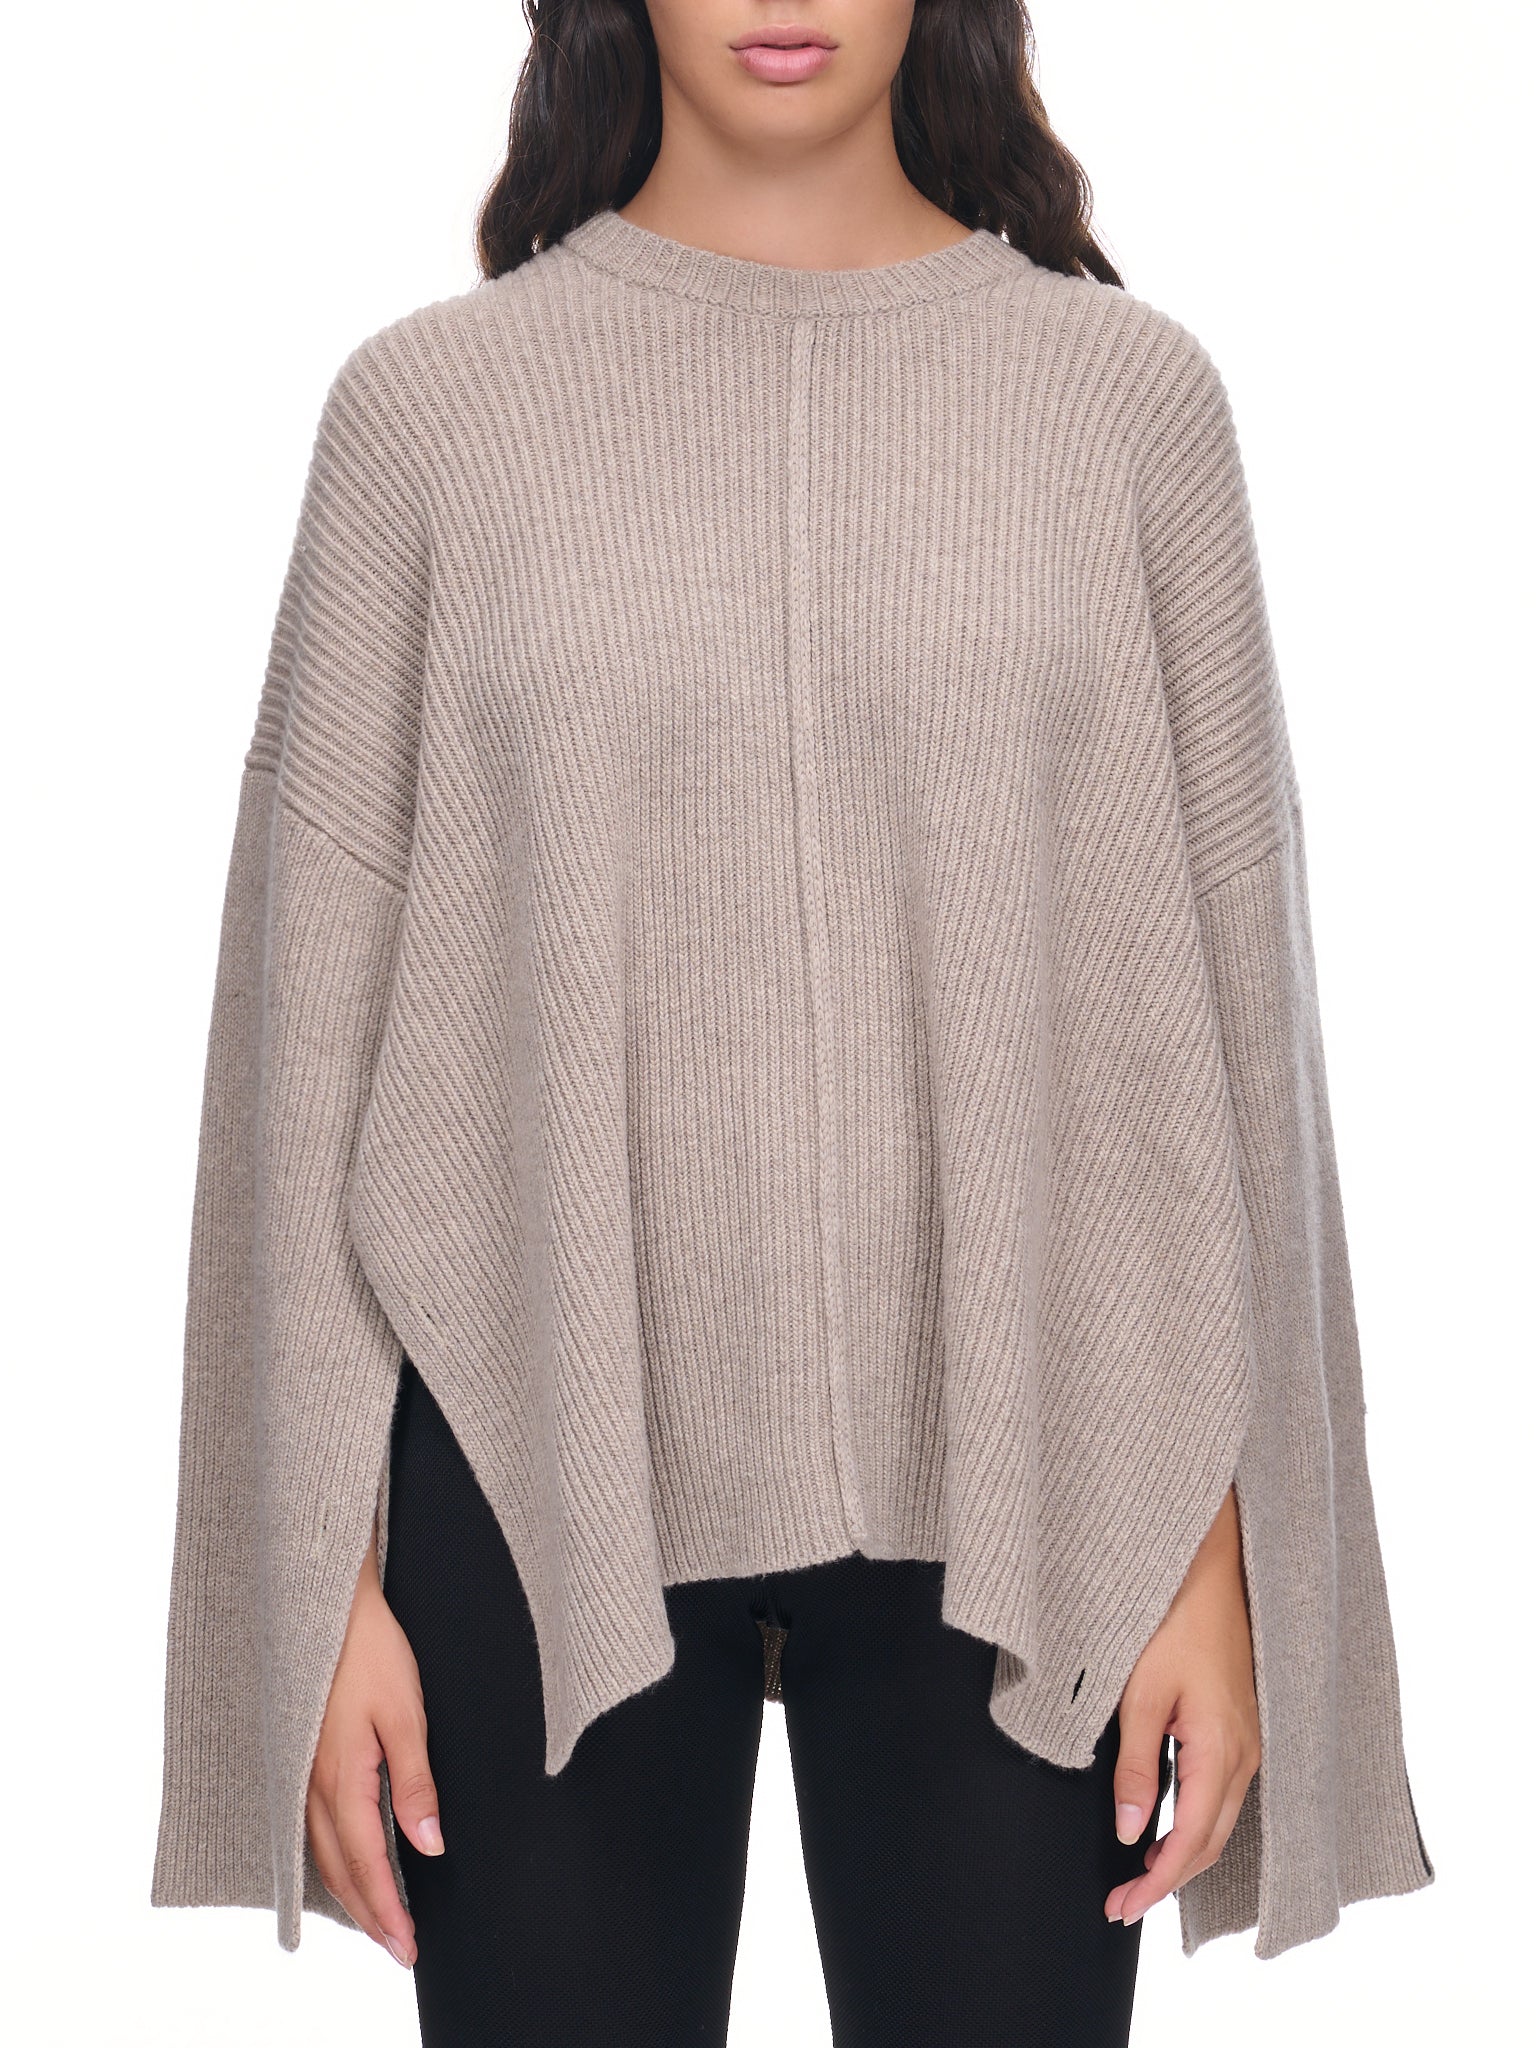 Peter do cape sweater in wool